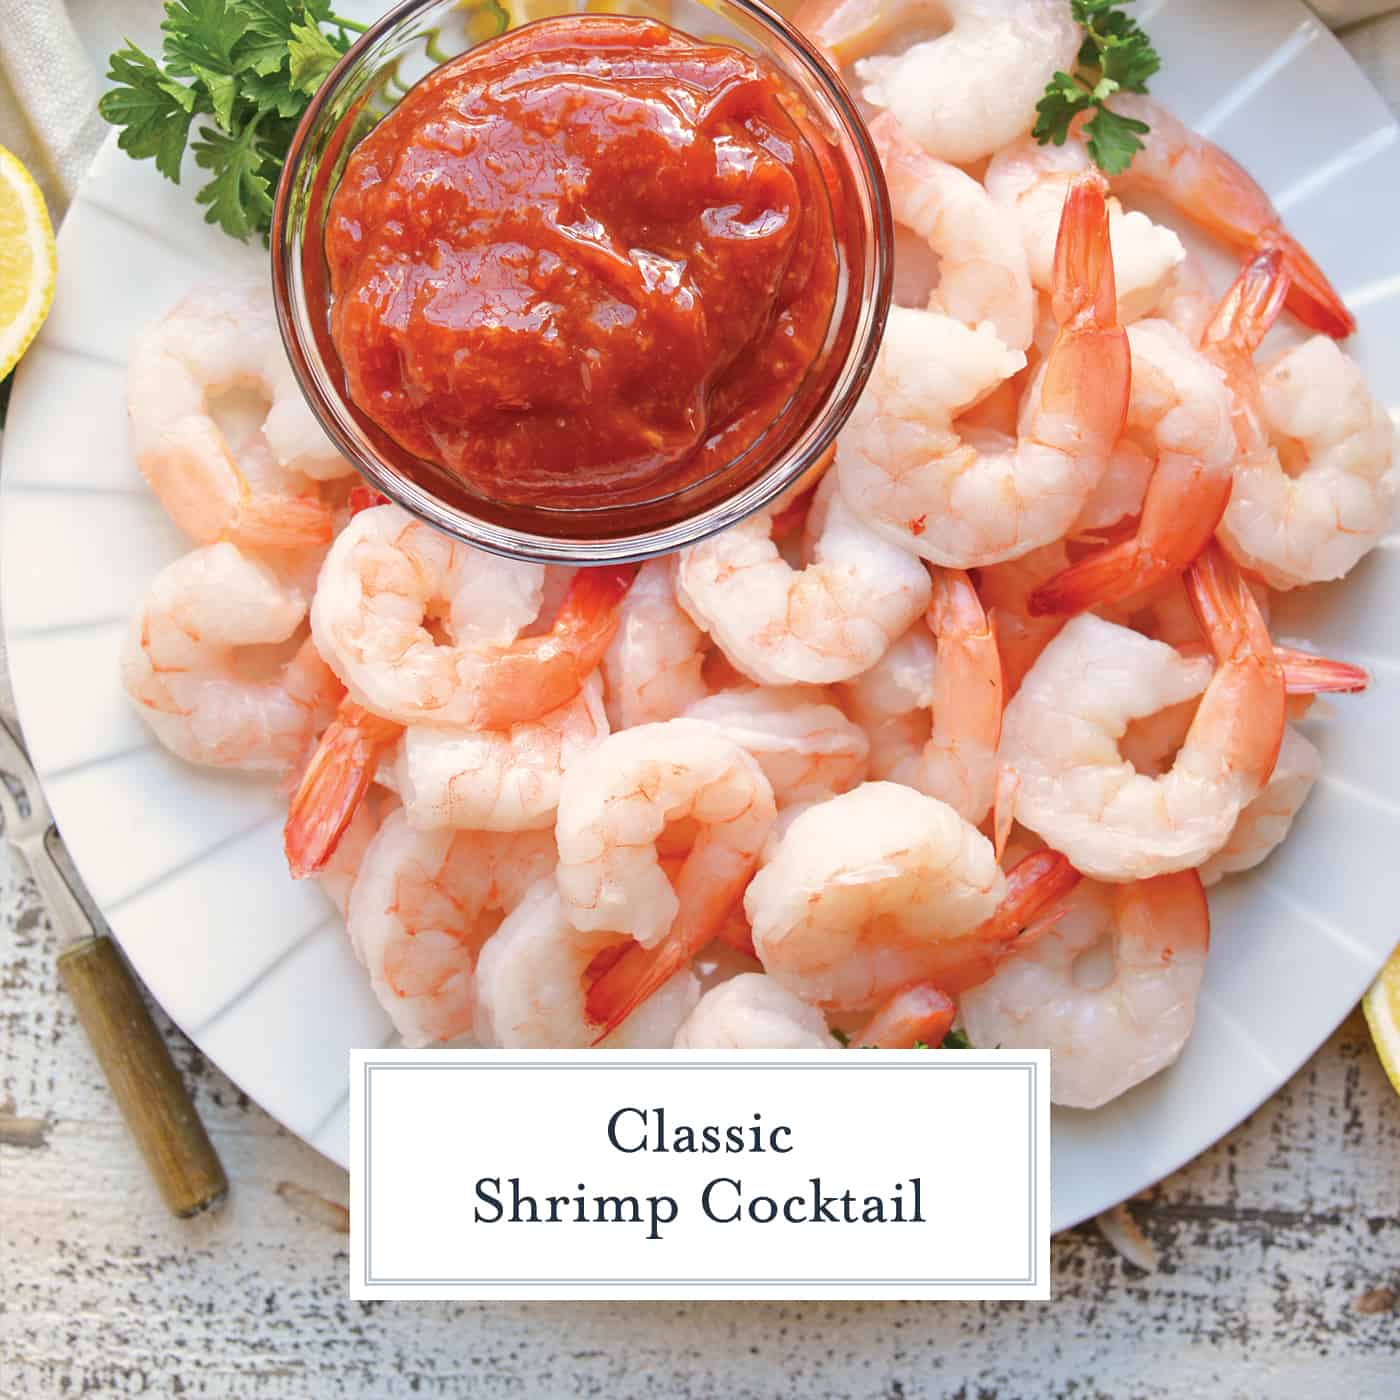 This Classic Shrimp Cocktail recipe goes back to the basics, with only 3 ingredients to the best shrimp cocktail. Perfect for holidays and dinner parties! #shrimpcocktailrecipe #bestshrimpcocktail www.savoryexperiments.com